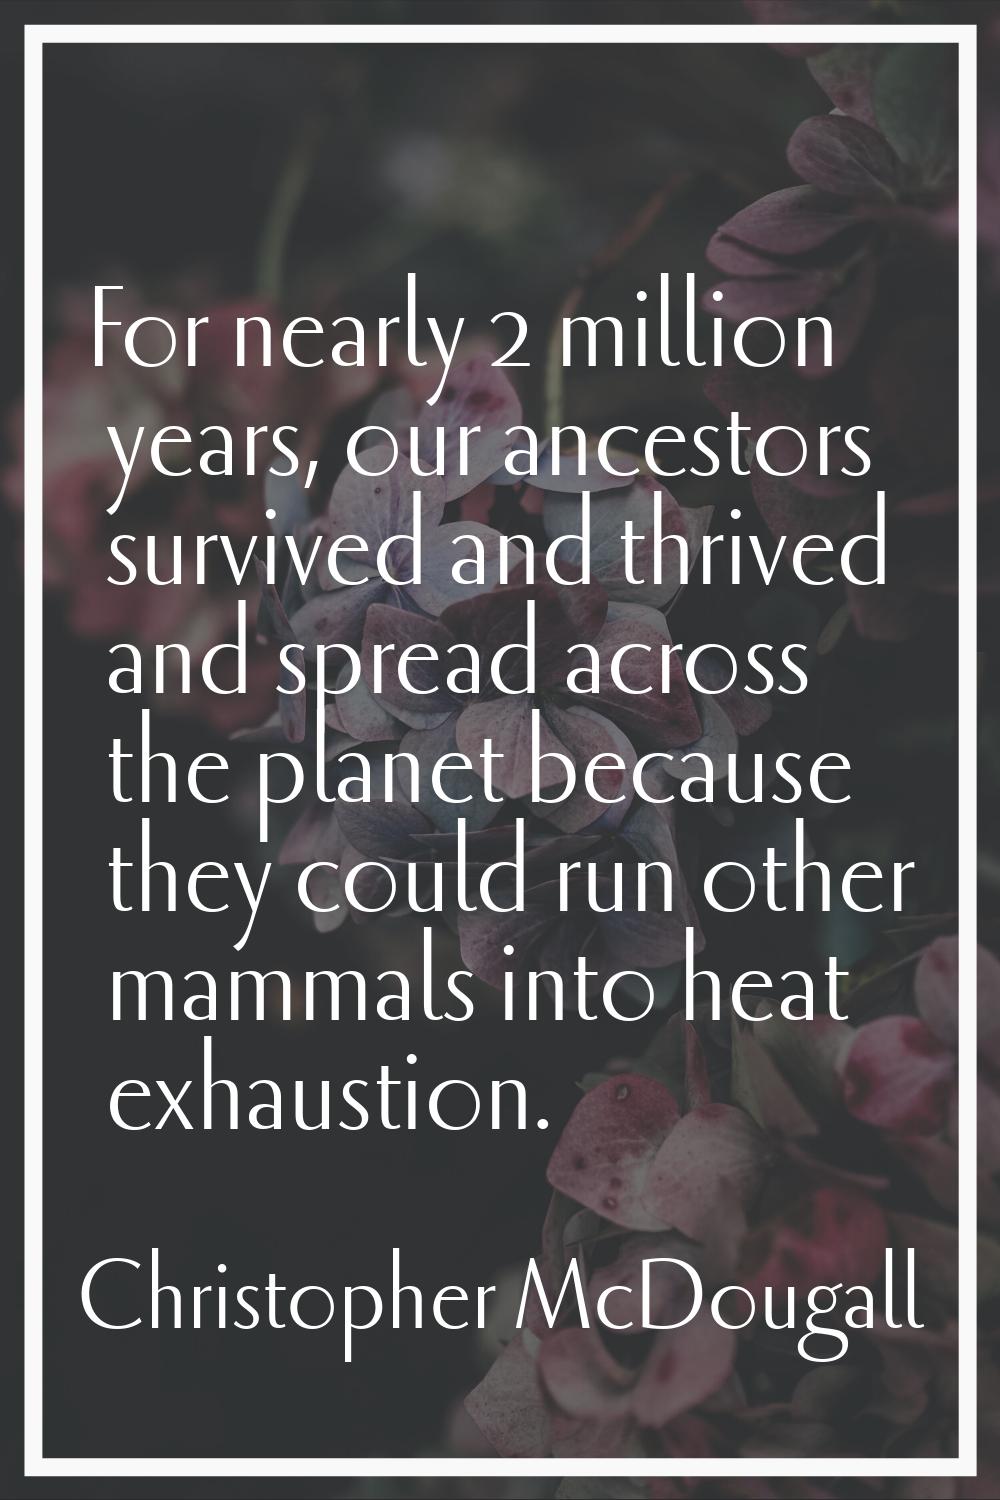 For nearly 2 million years, our ancestors survived and thrived and spread across the planet because